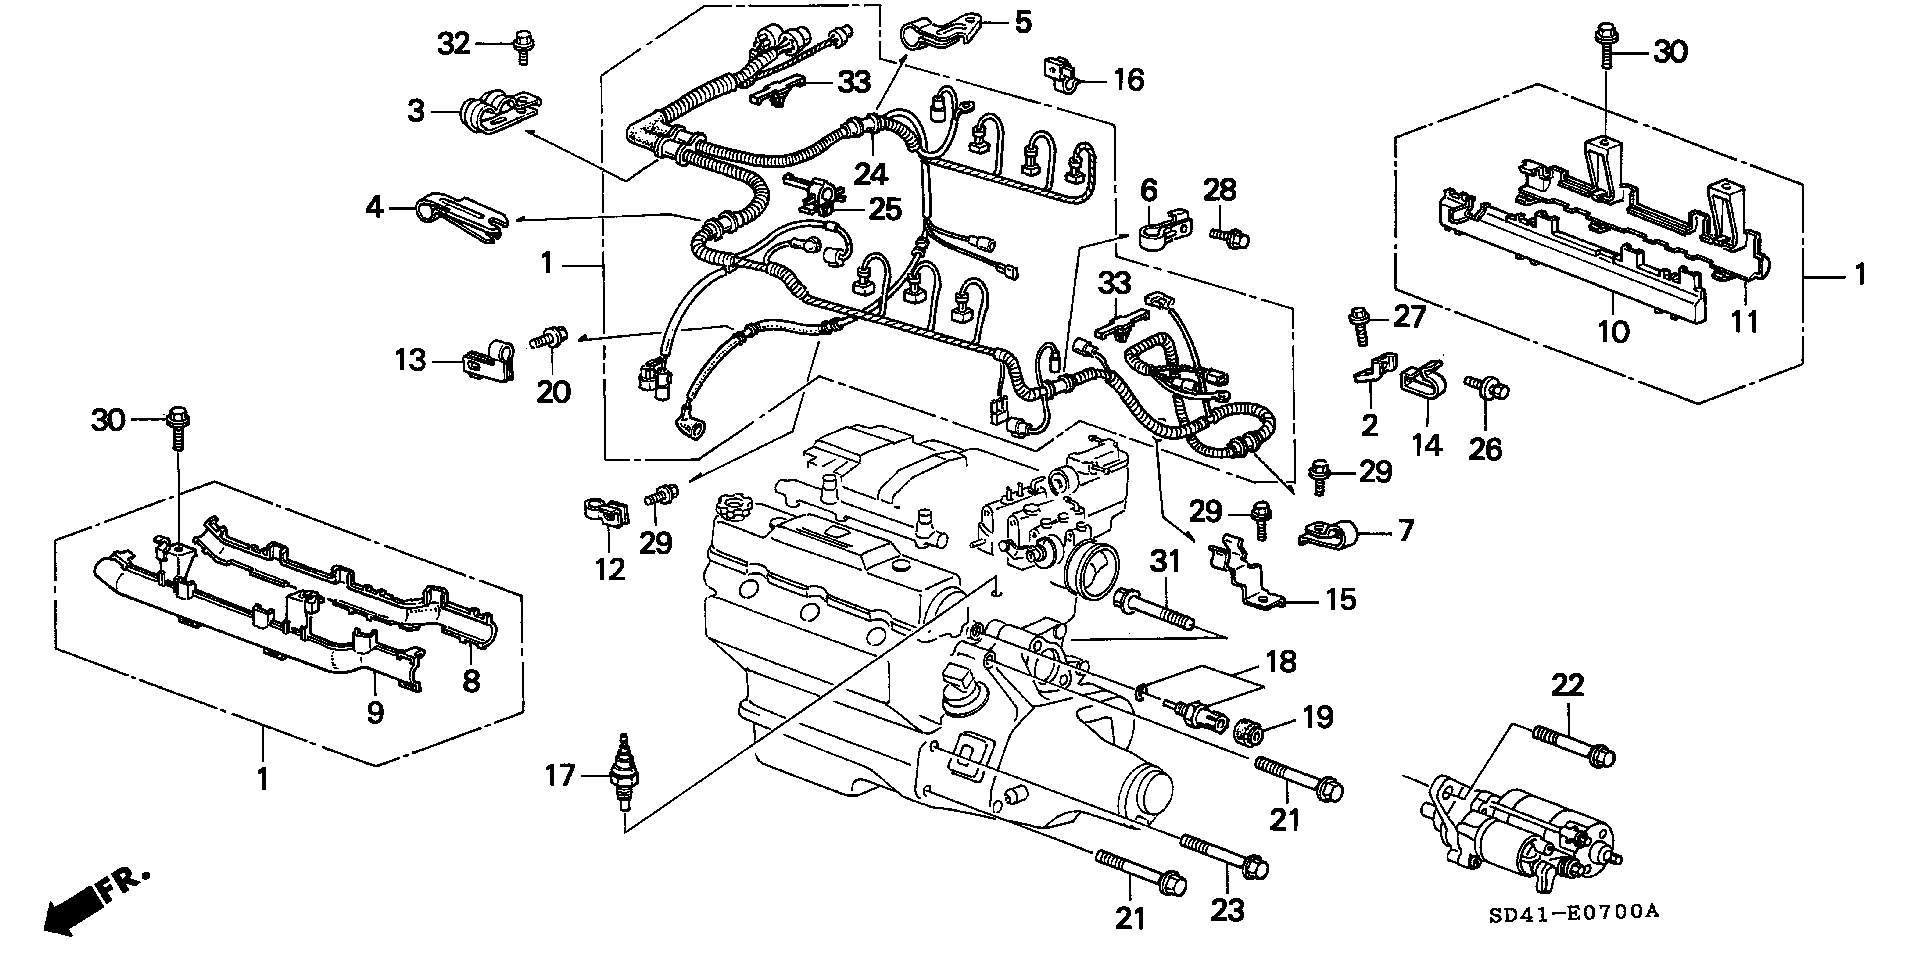 ENGINE WIRE HARNESS/ HARNESS CLAMP